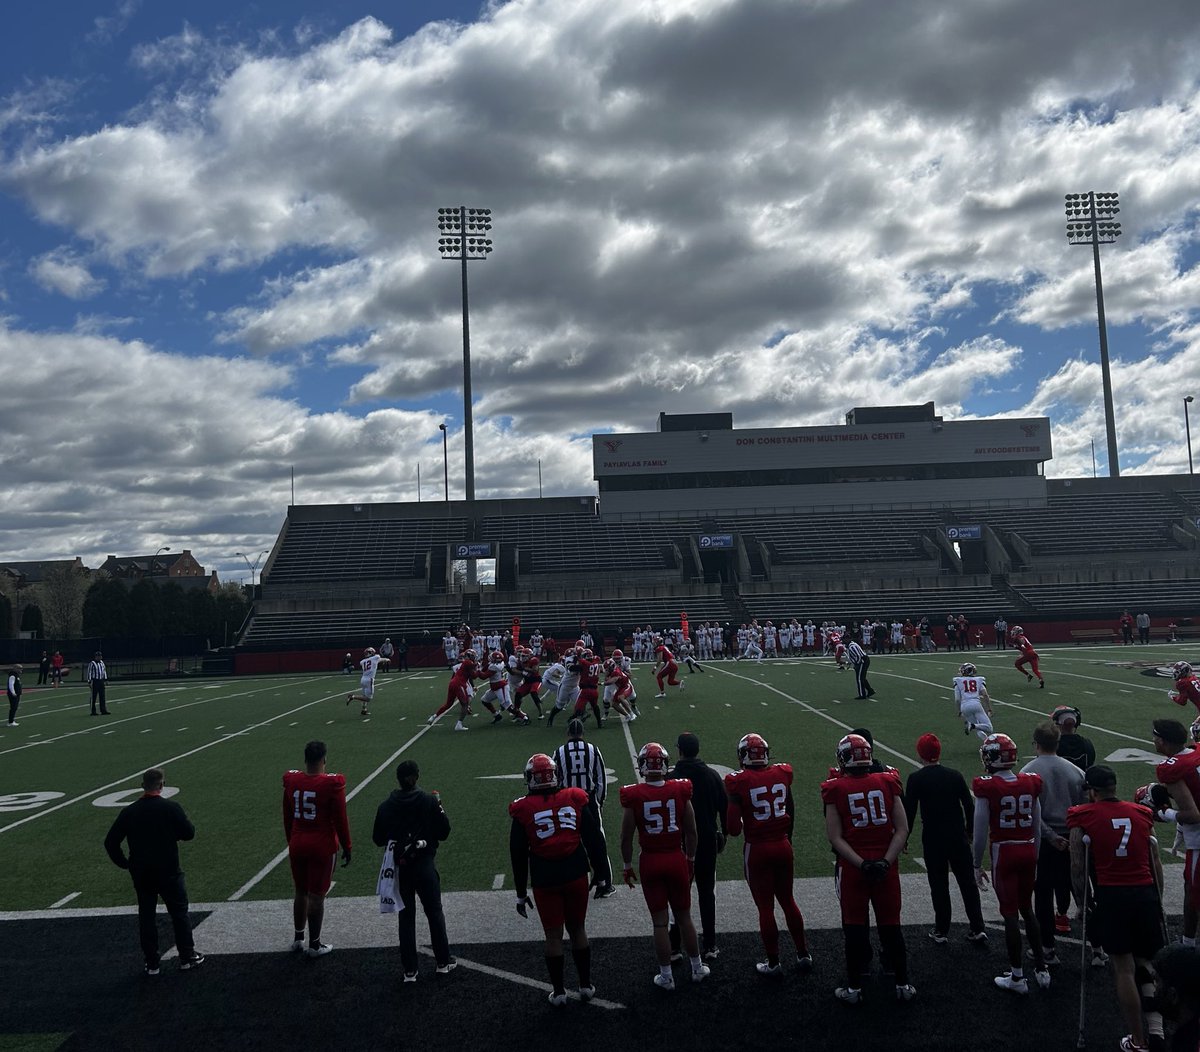 Thanks @ysufootball for having me out yesterday, had a great time and can’t wait to go to a camp this summer @TVSCOTTIESFB @CoachBuj @CoachHefNCSA @CoachTPhillips